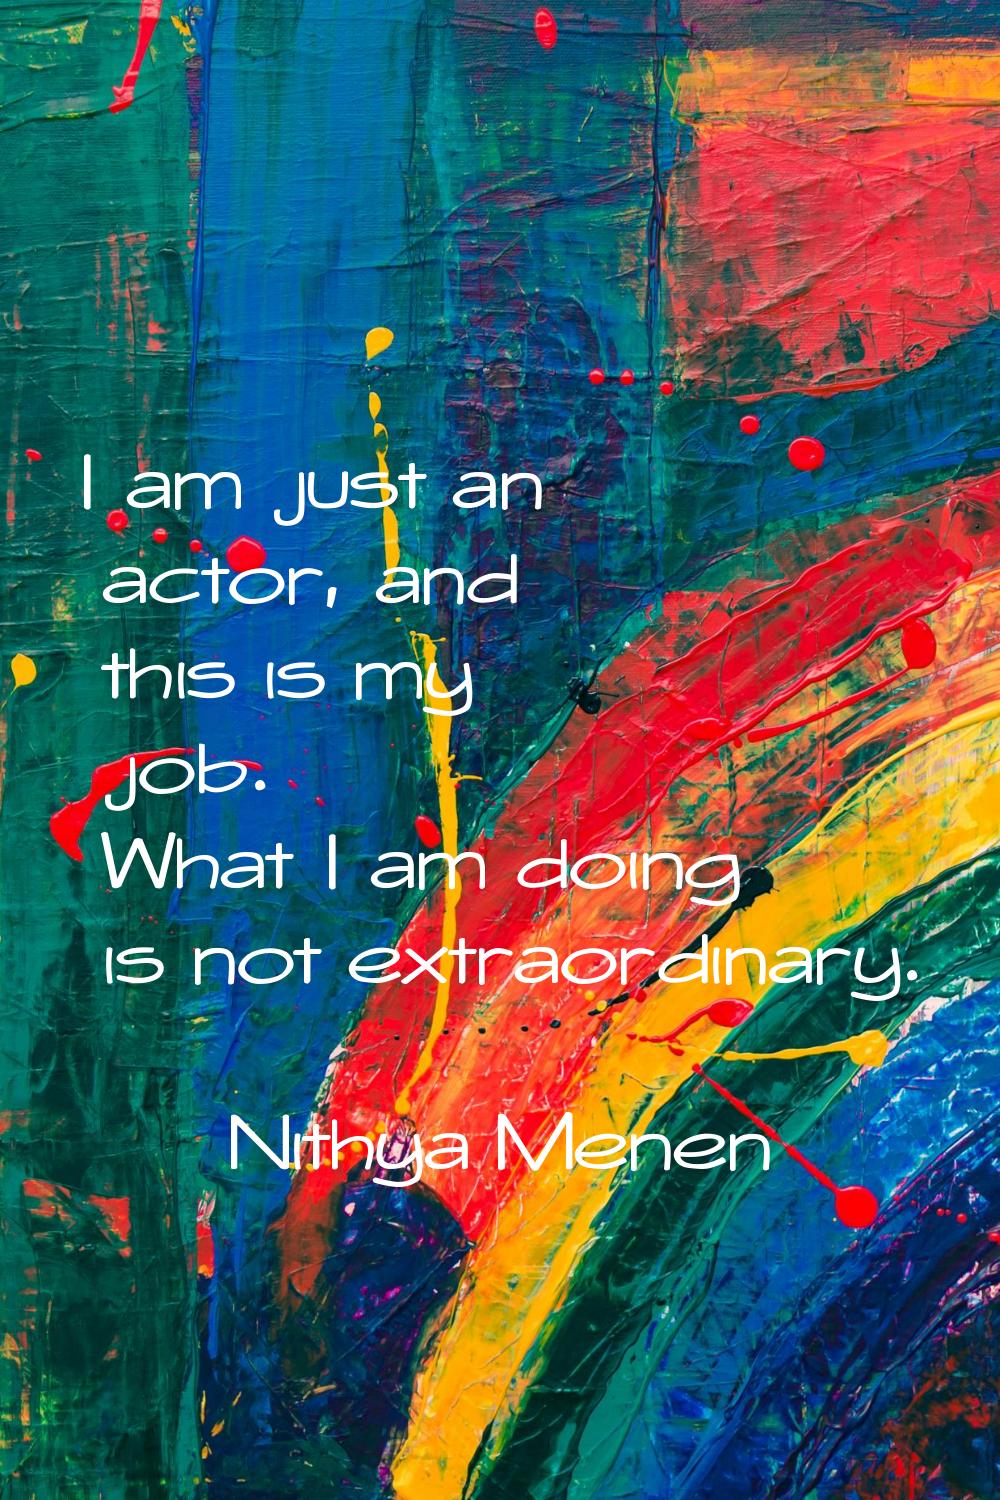 I am just an actor, and this is my job. What I am doing is not extraordinary.